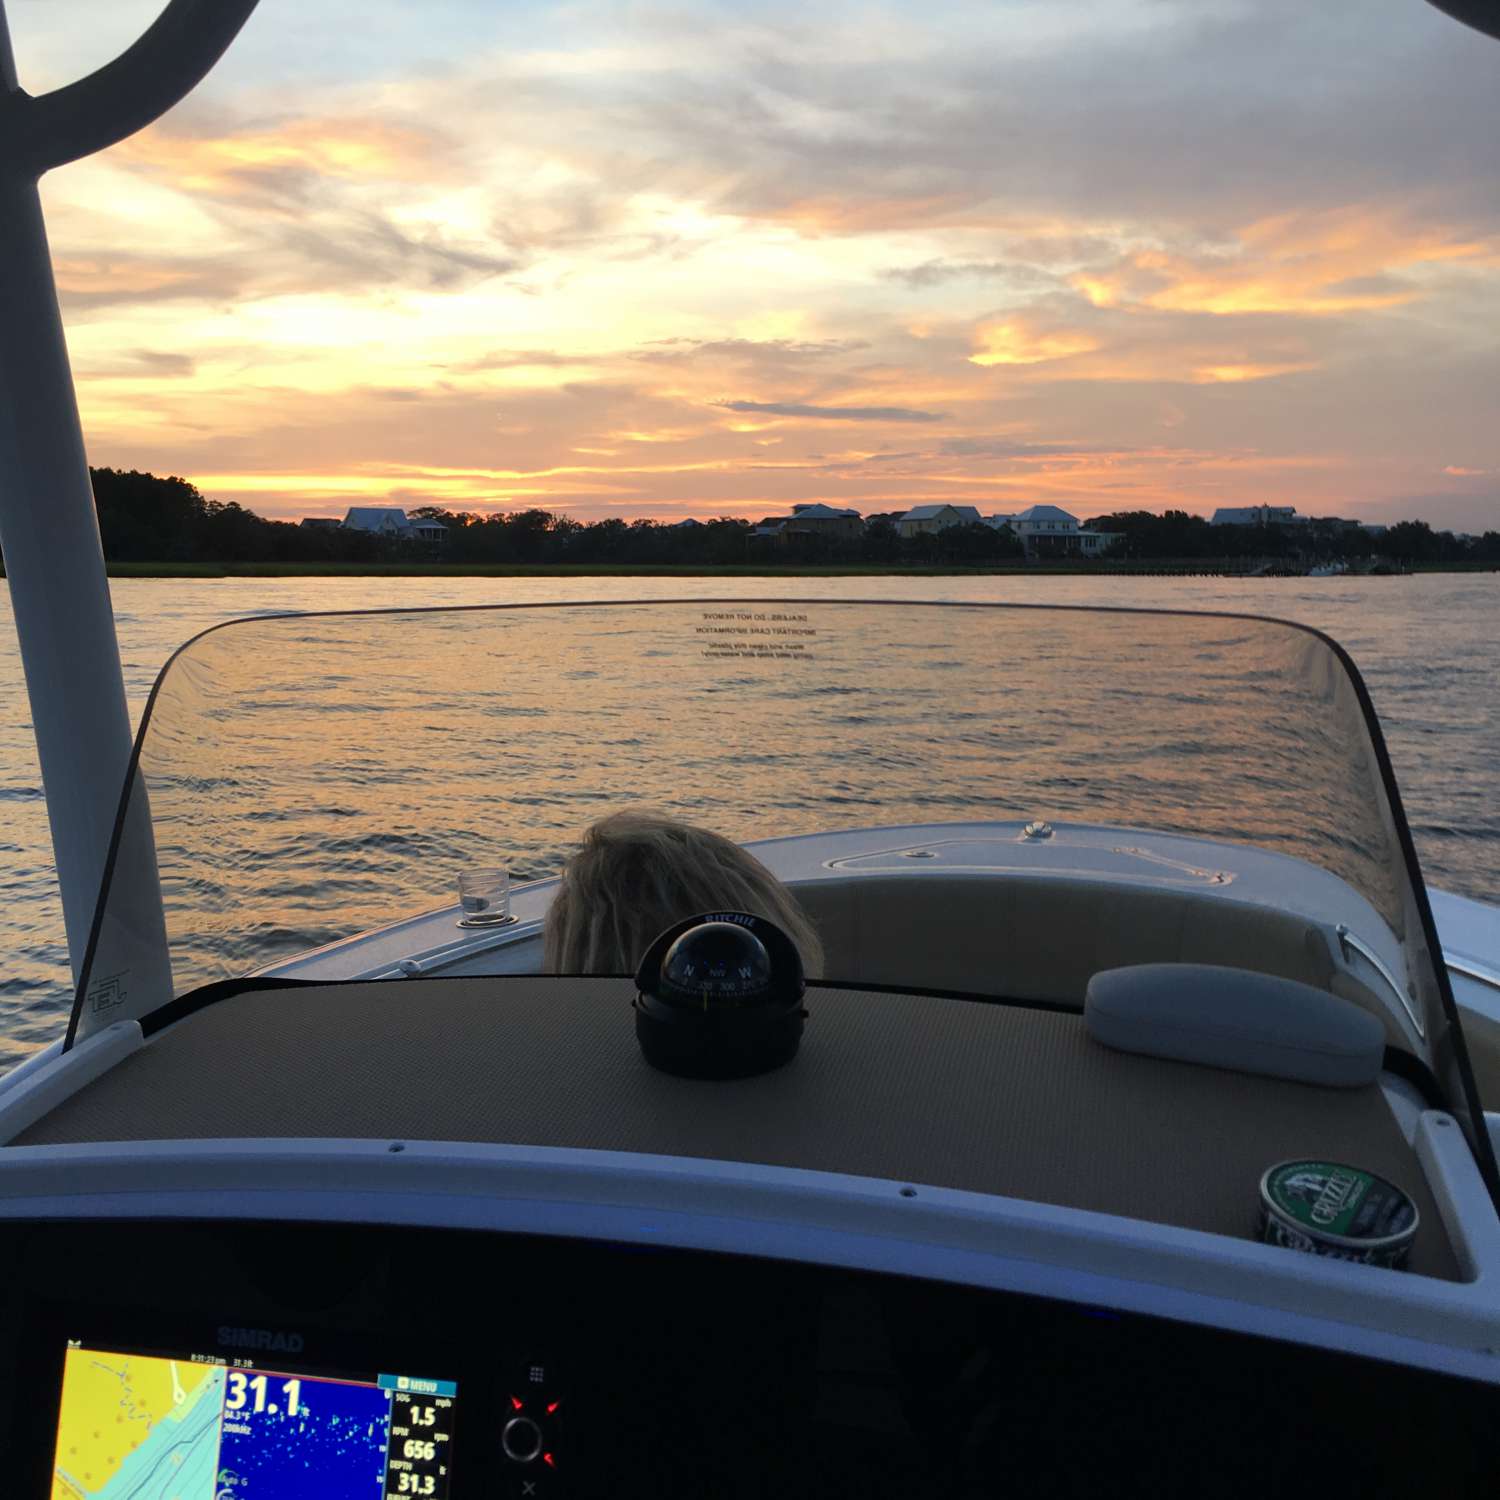 Watching the sunset in our new Sportsman boat. Watched the fireworks from the boat. Wando River, Charleston SC